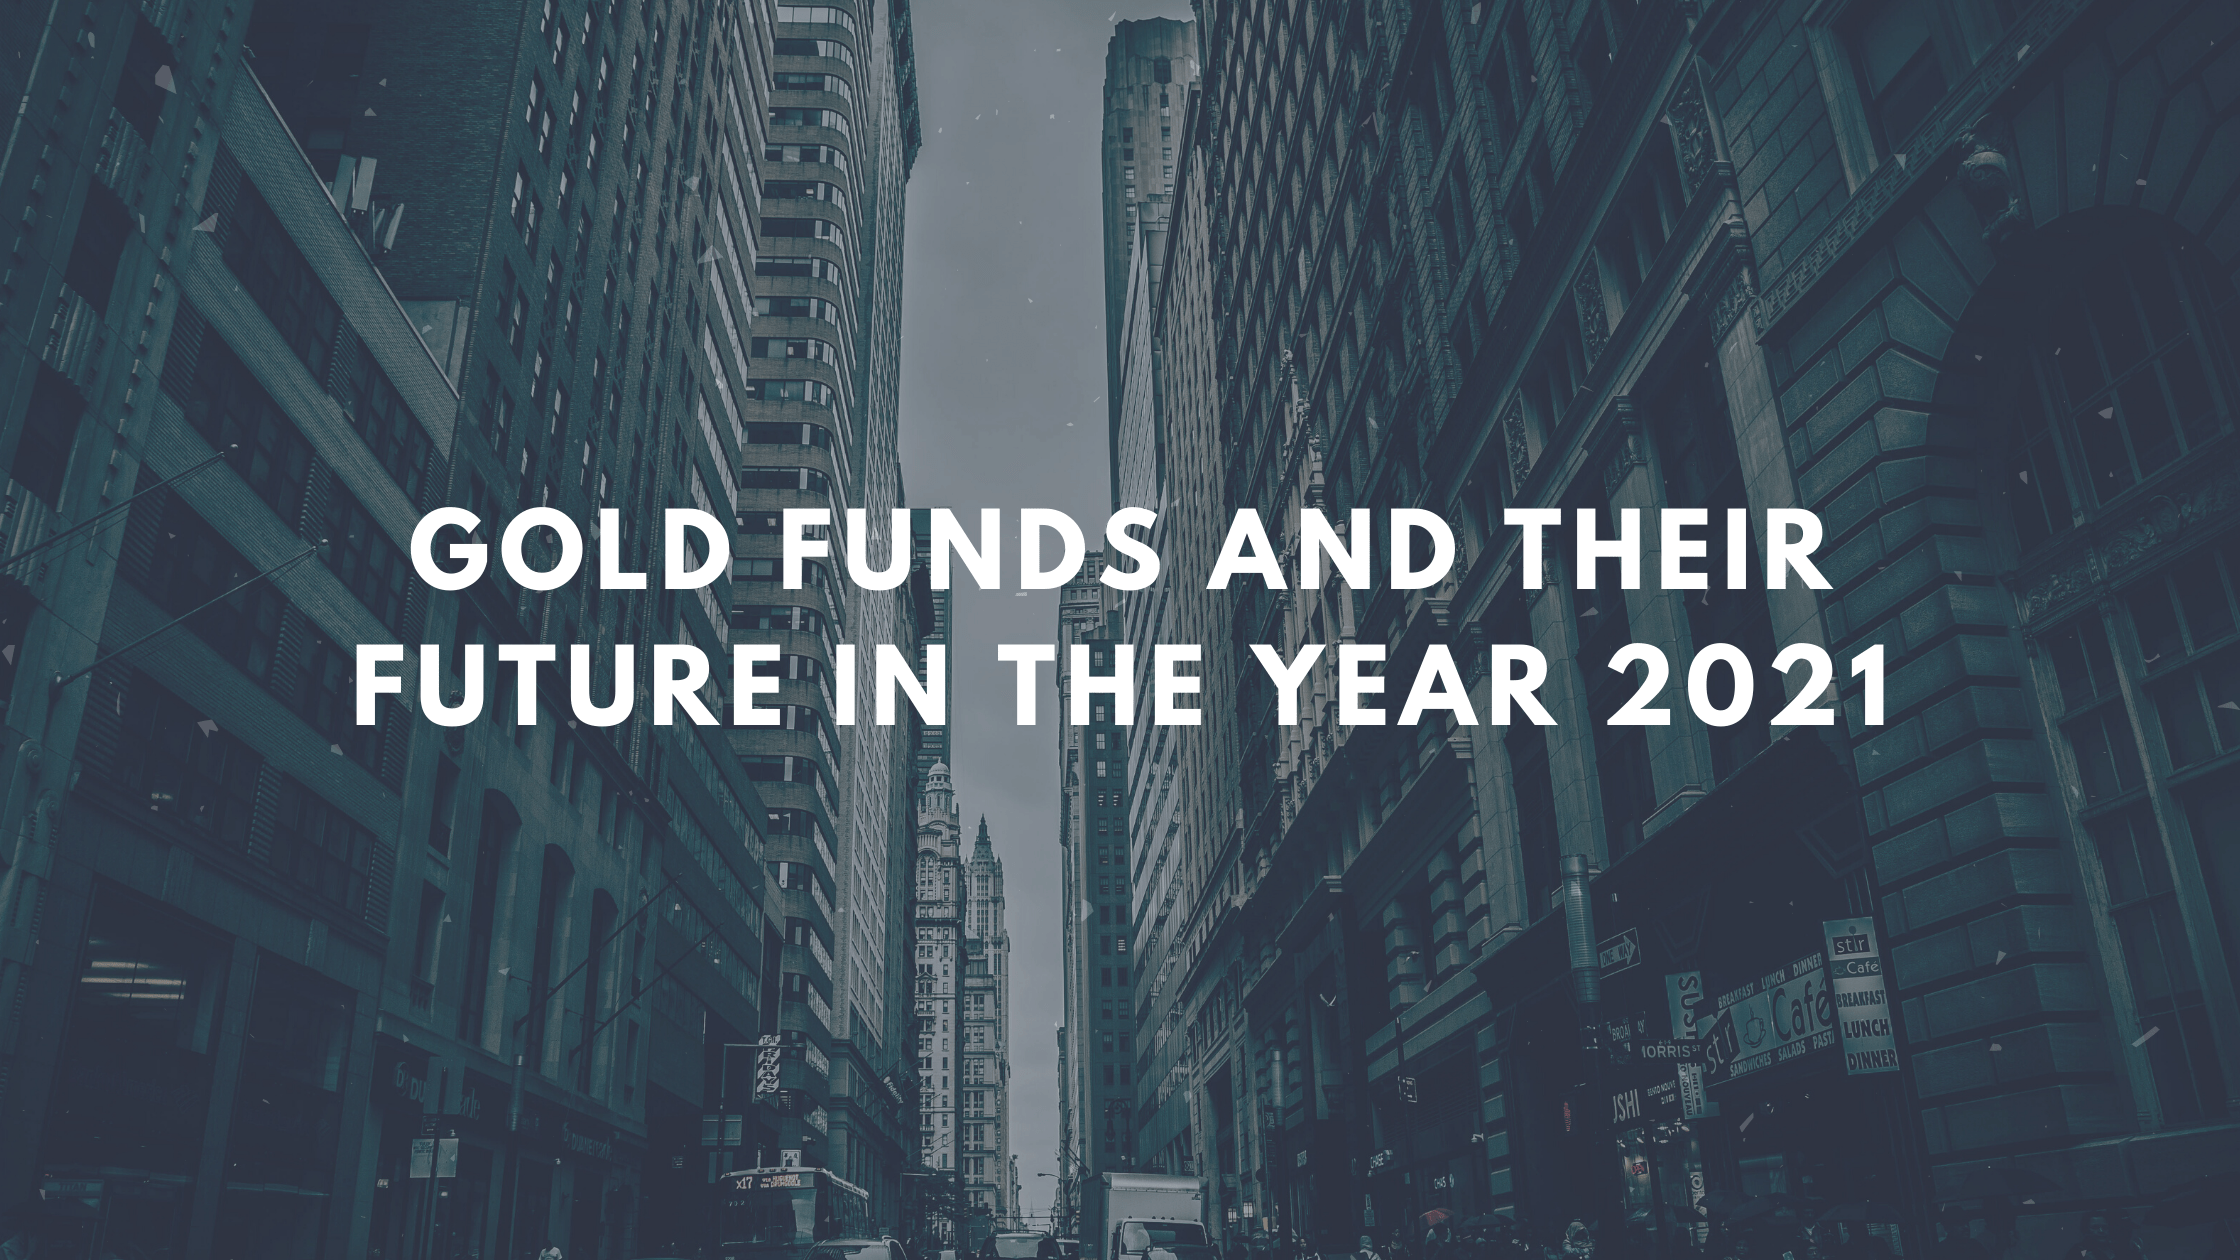 Gold funds and their future